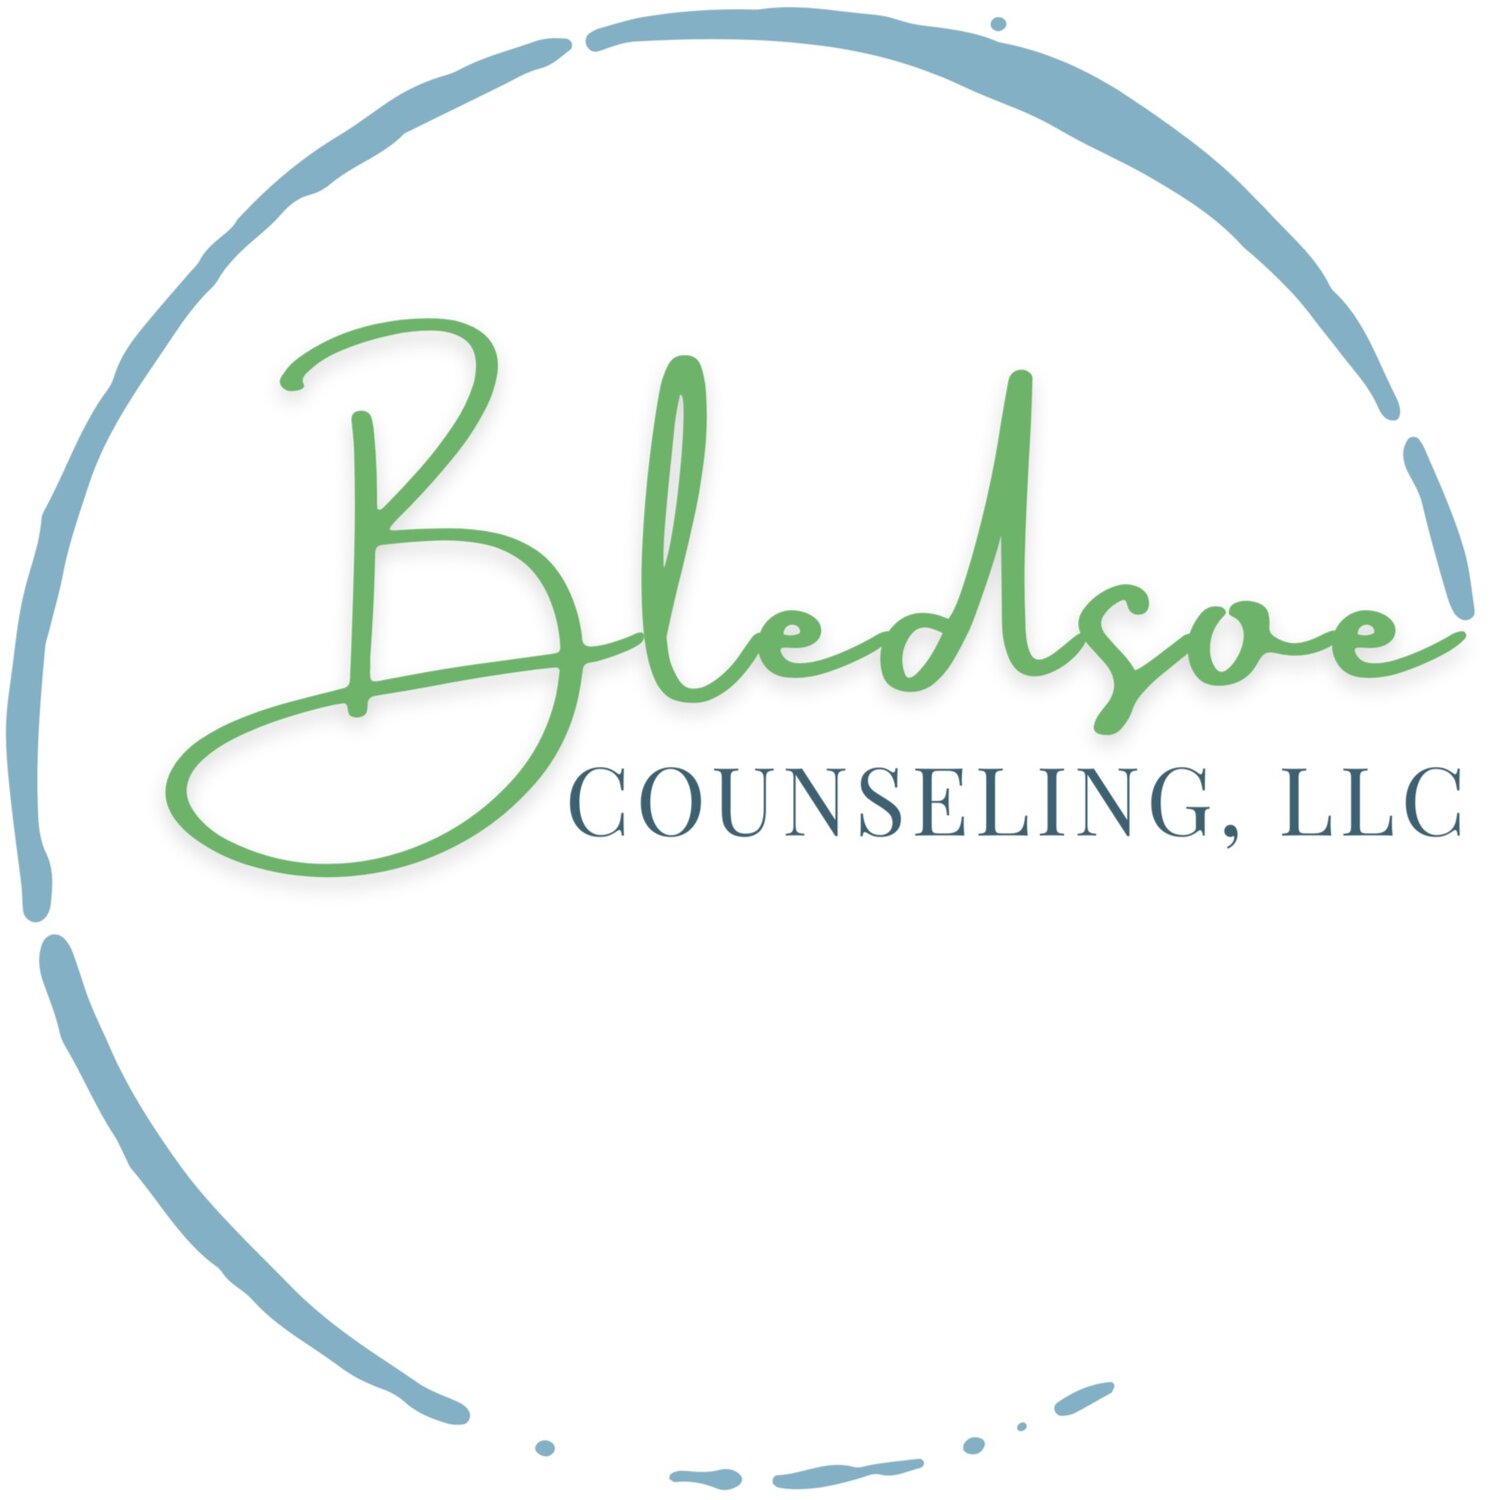 Bledsoe Counseling